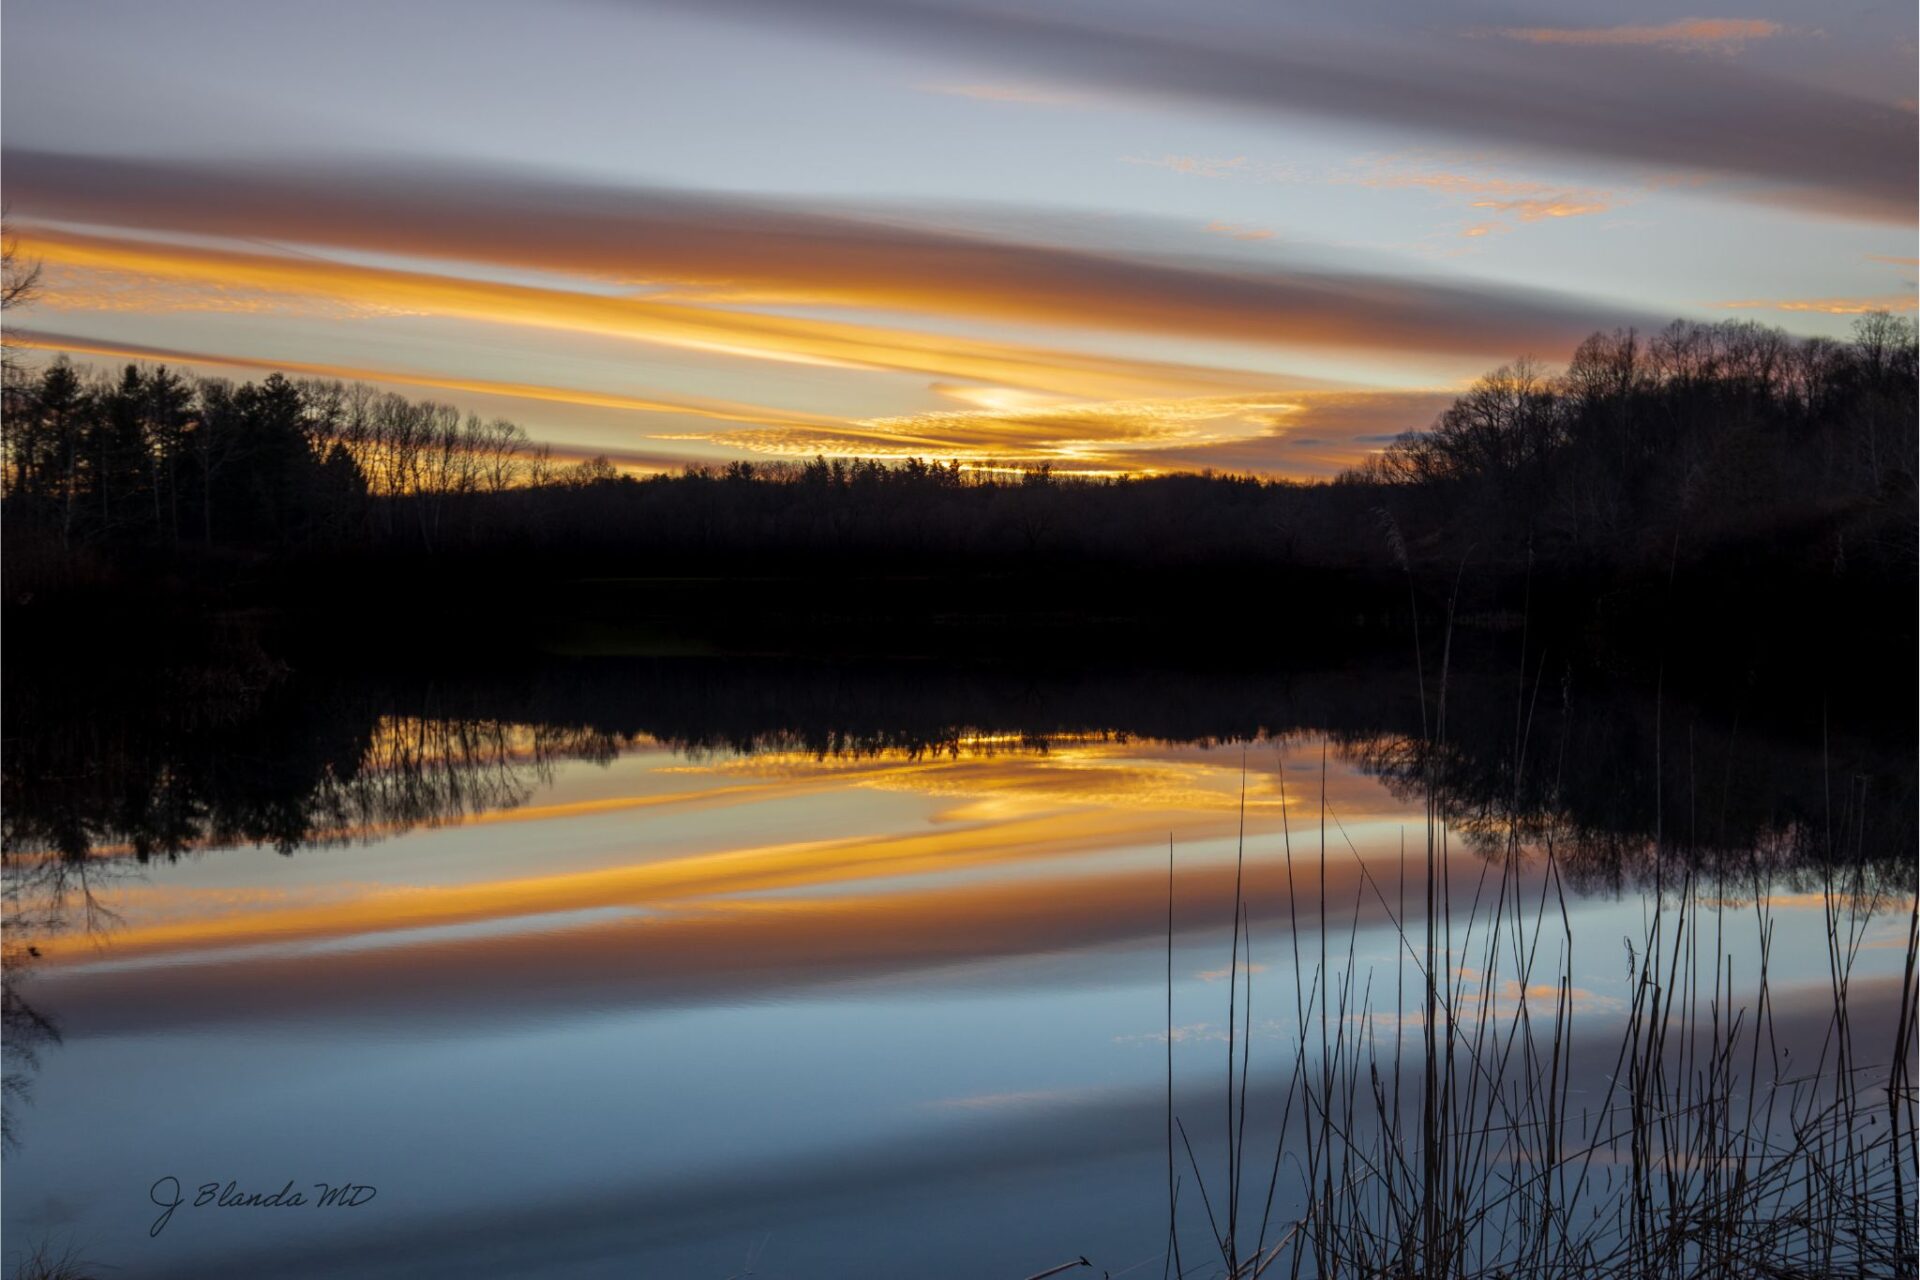 A photo of a pond reflecting the orange light of a sunset, clouds, and blue sky above it. Dark tree silhouettes surround the pond.